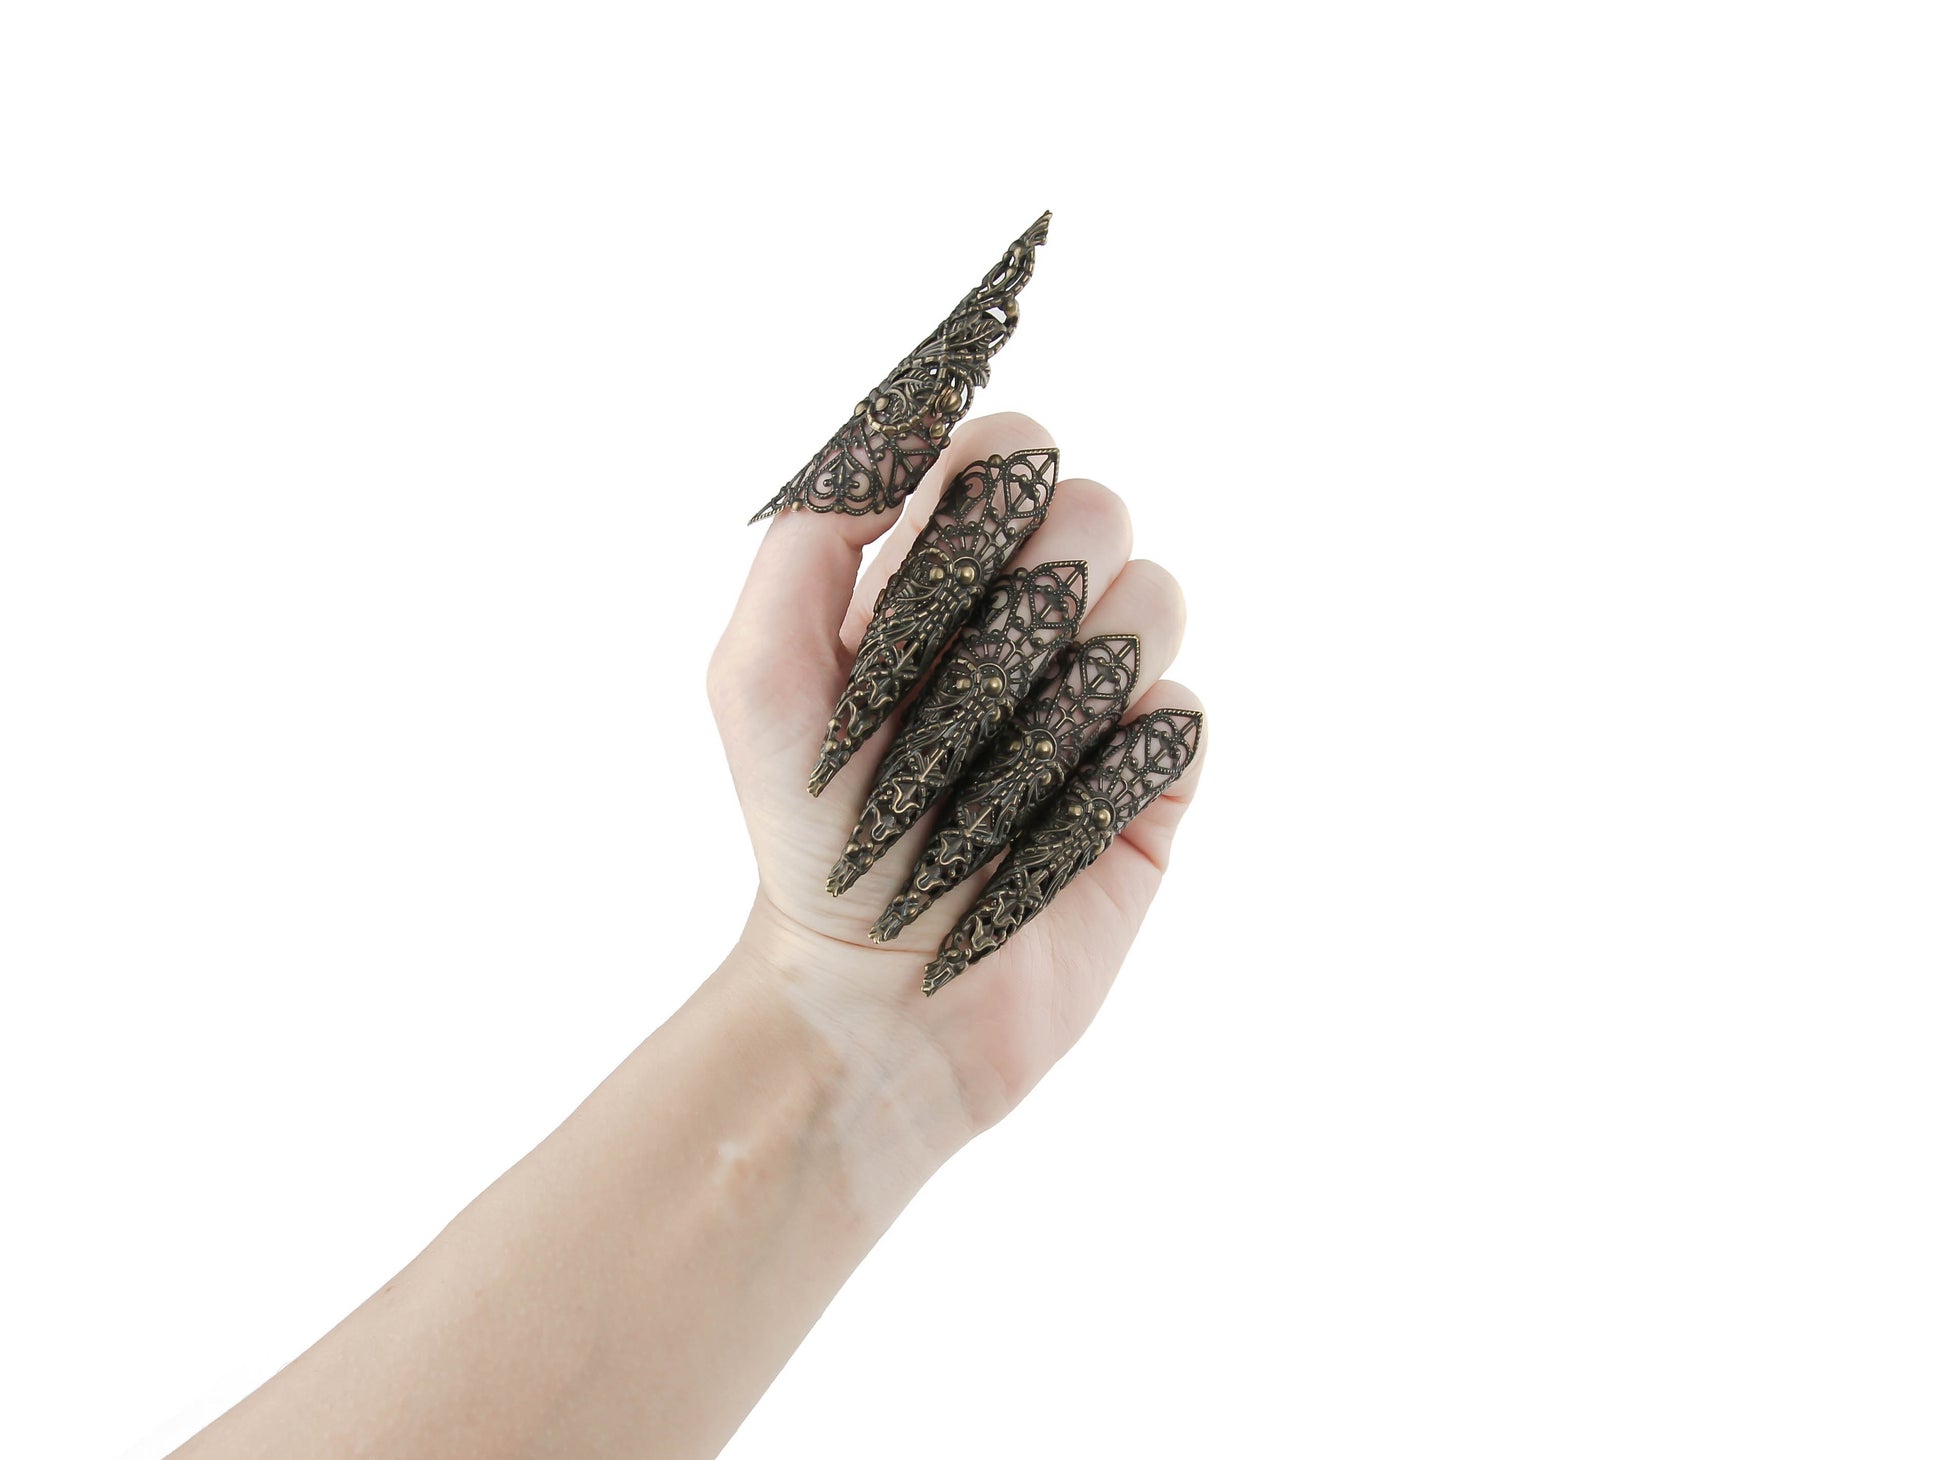 A full hand set of extra-long, intricately designed nail claws from Myril Jewels exudes a dark, neo-goth elegance. Ideal for Halloween, these claws are a bold choice for those who love punk jewelry, whimsigoth style, or witchcore. They're perfect for adding an avant-garde touch to everyday wear or as a statement at rave parties and festivals. These claws are also a unique gift idea for a goth girlfriend.